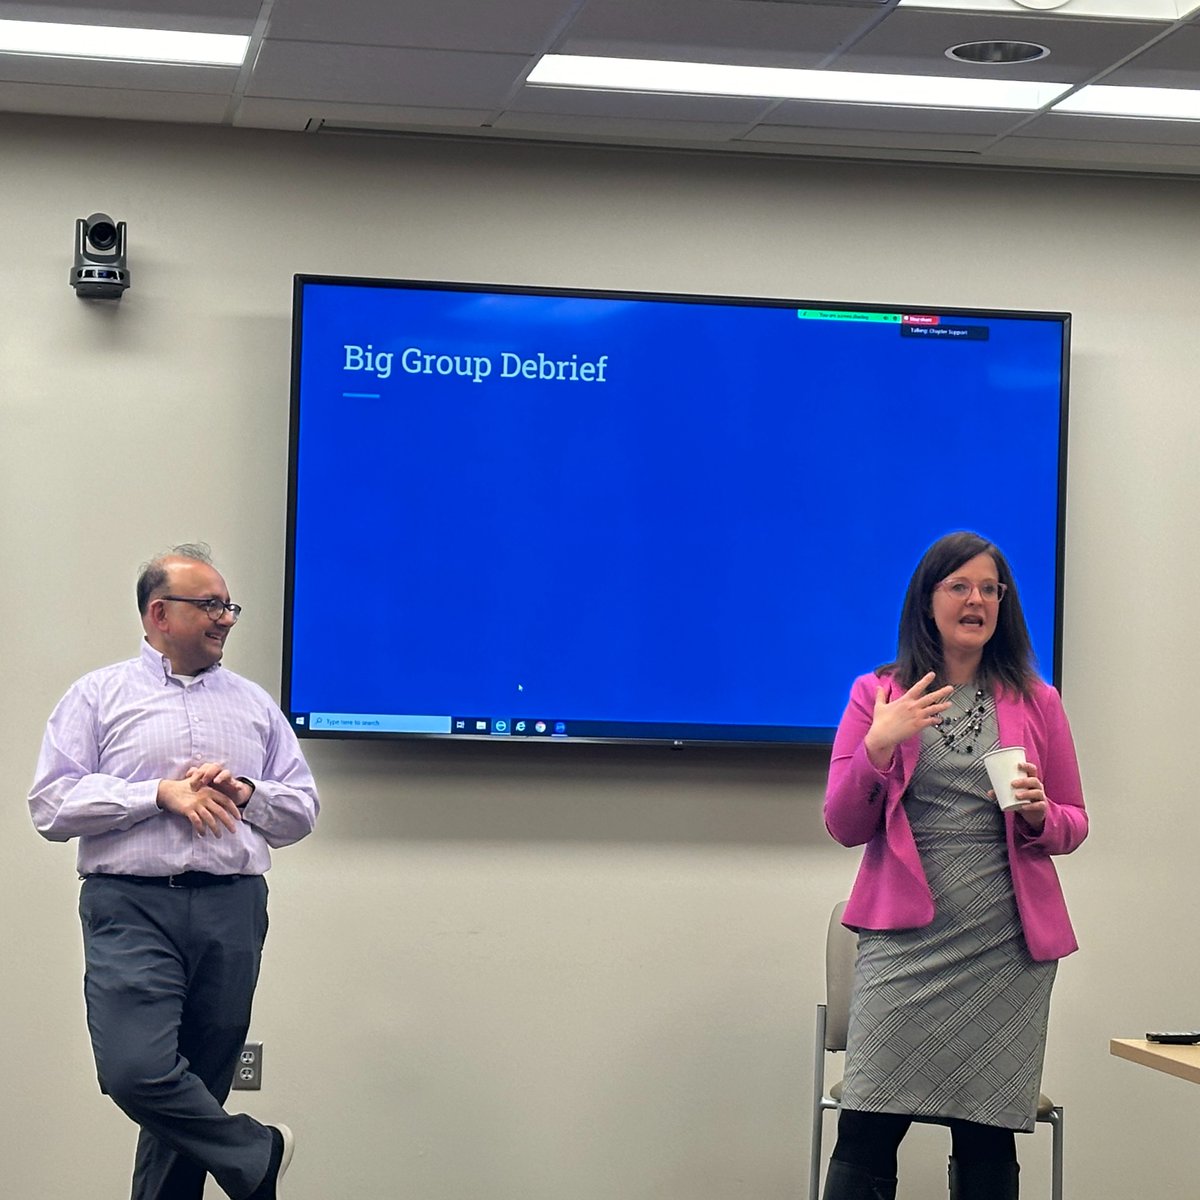 The NE Chapter of the American Psychiatric Nurses Association (APNA) held its annual Spring Conference on April 19th. Jawed Bharwani, MBBS, CHI Health Immanuel Child/Adolescent Psychiatrist and Sara Bharwani, PhD, professor at Creighton University, presented on mindfulness.